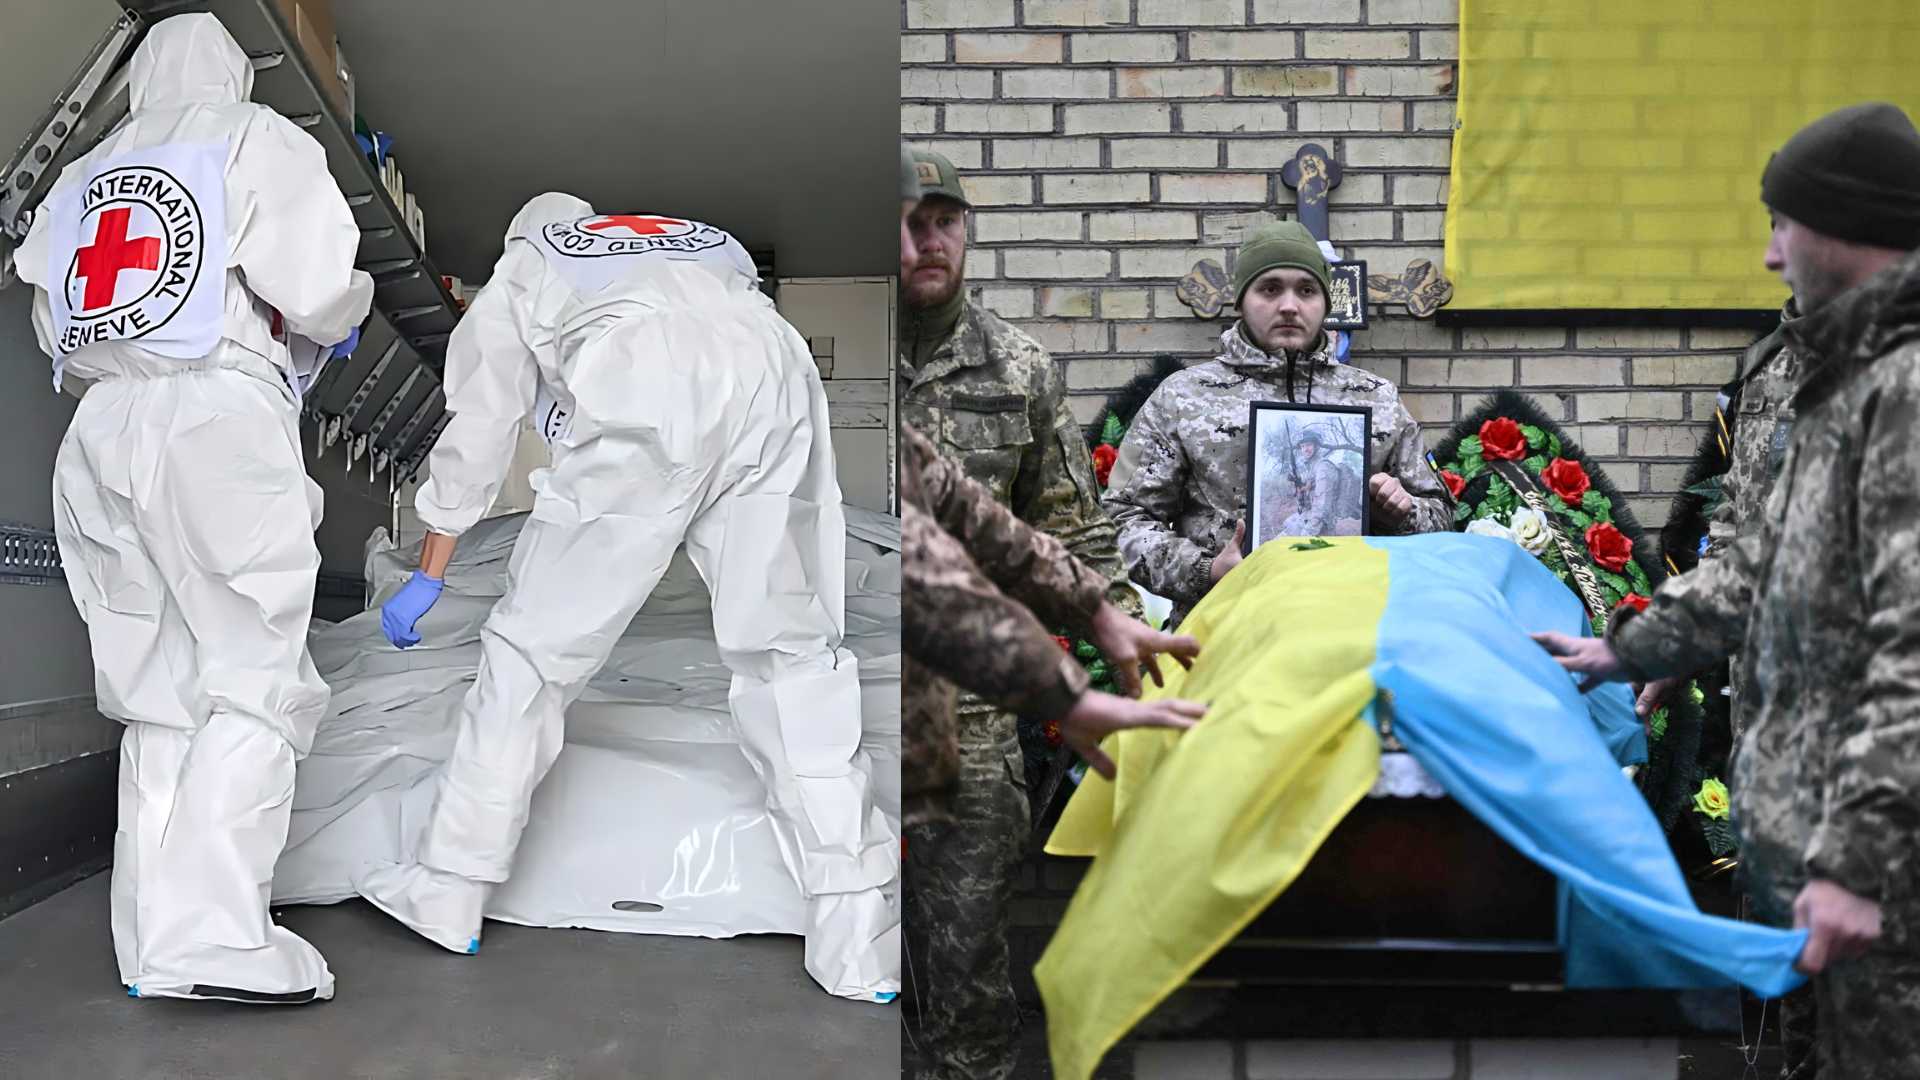 Russia Accused of Stealing, Selling Organs from Dead Ukrainians in Prisoner Exchanges Amidst Rising Tensions